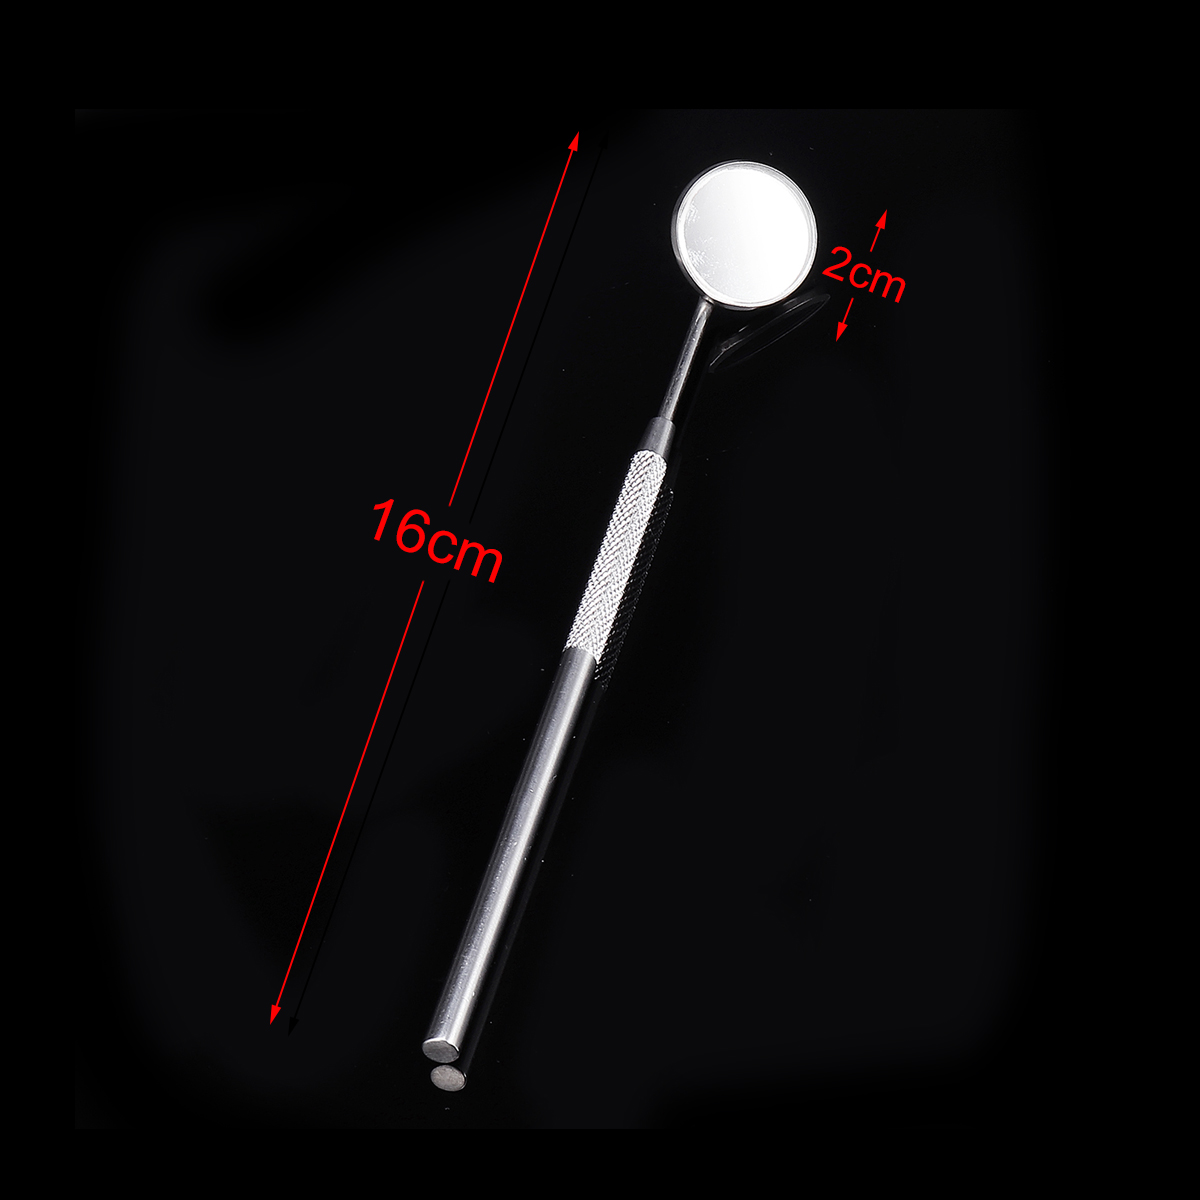 10Pcs-Dental-Mouth-Mirror-With-Handle-Dental-Instrument-Stainless-Steel-16cm-Dental-Tools-1309485